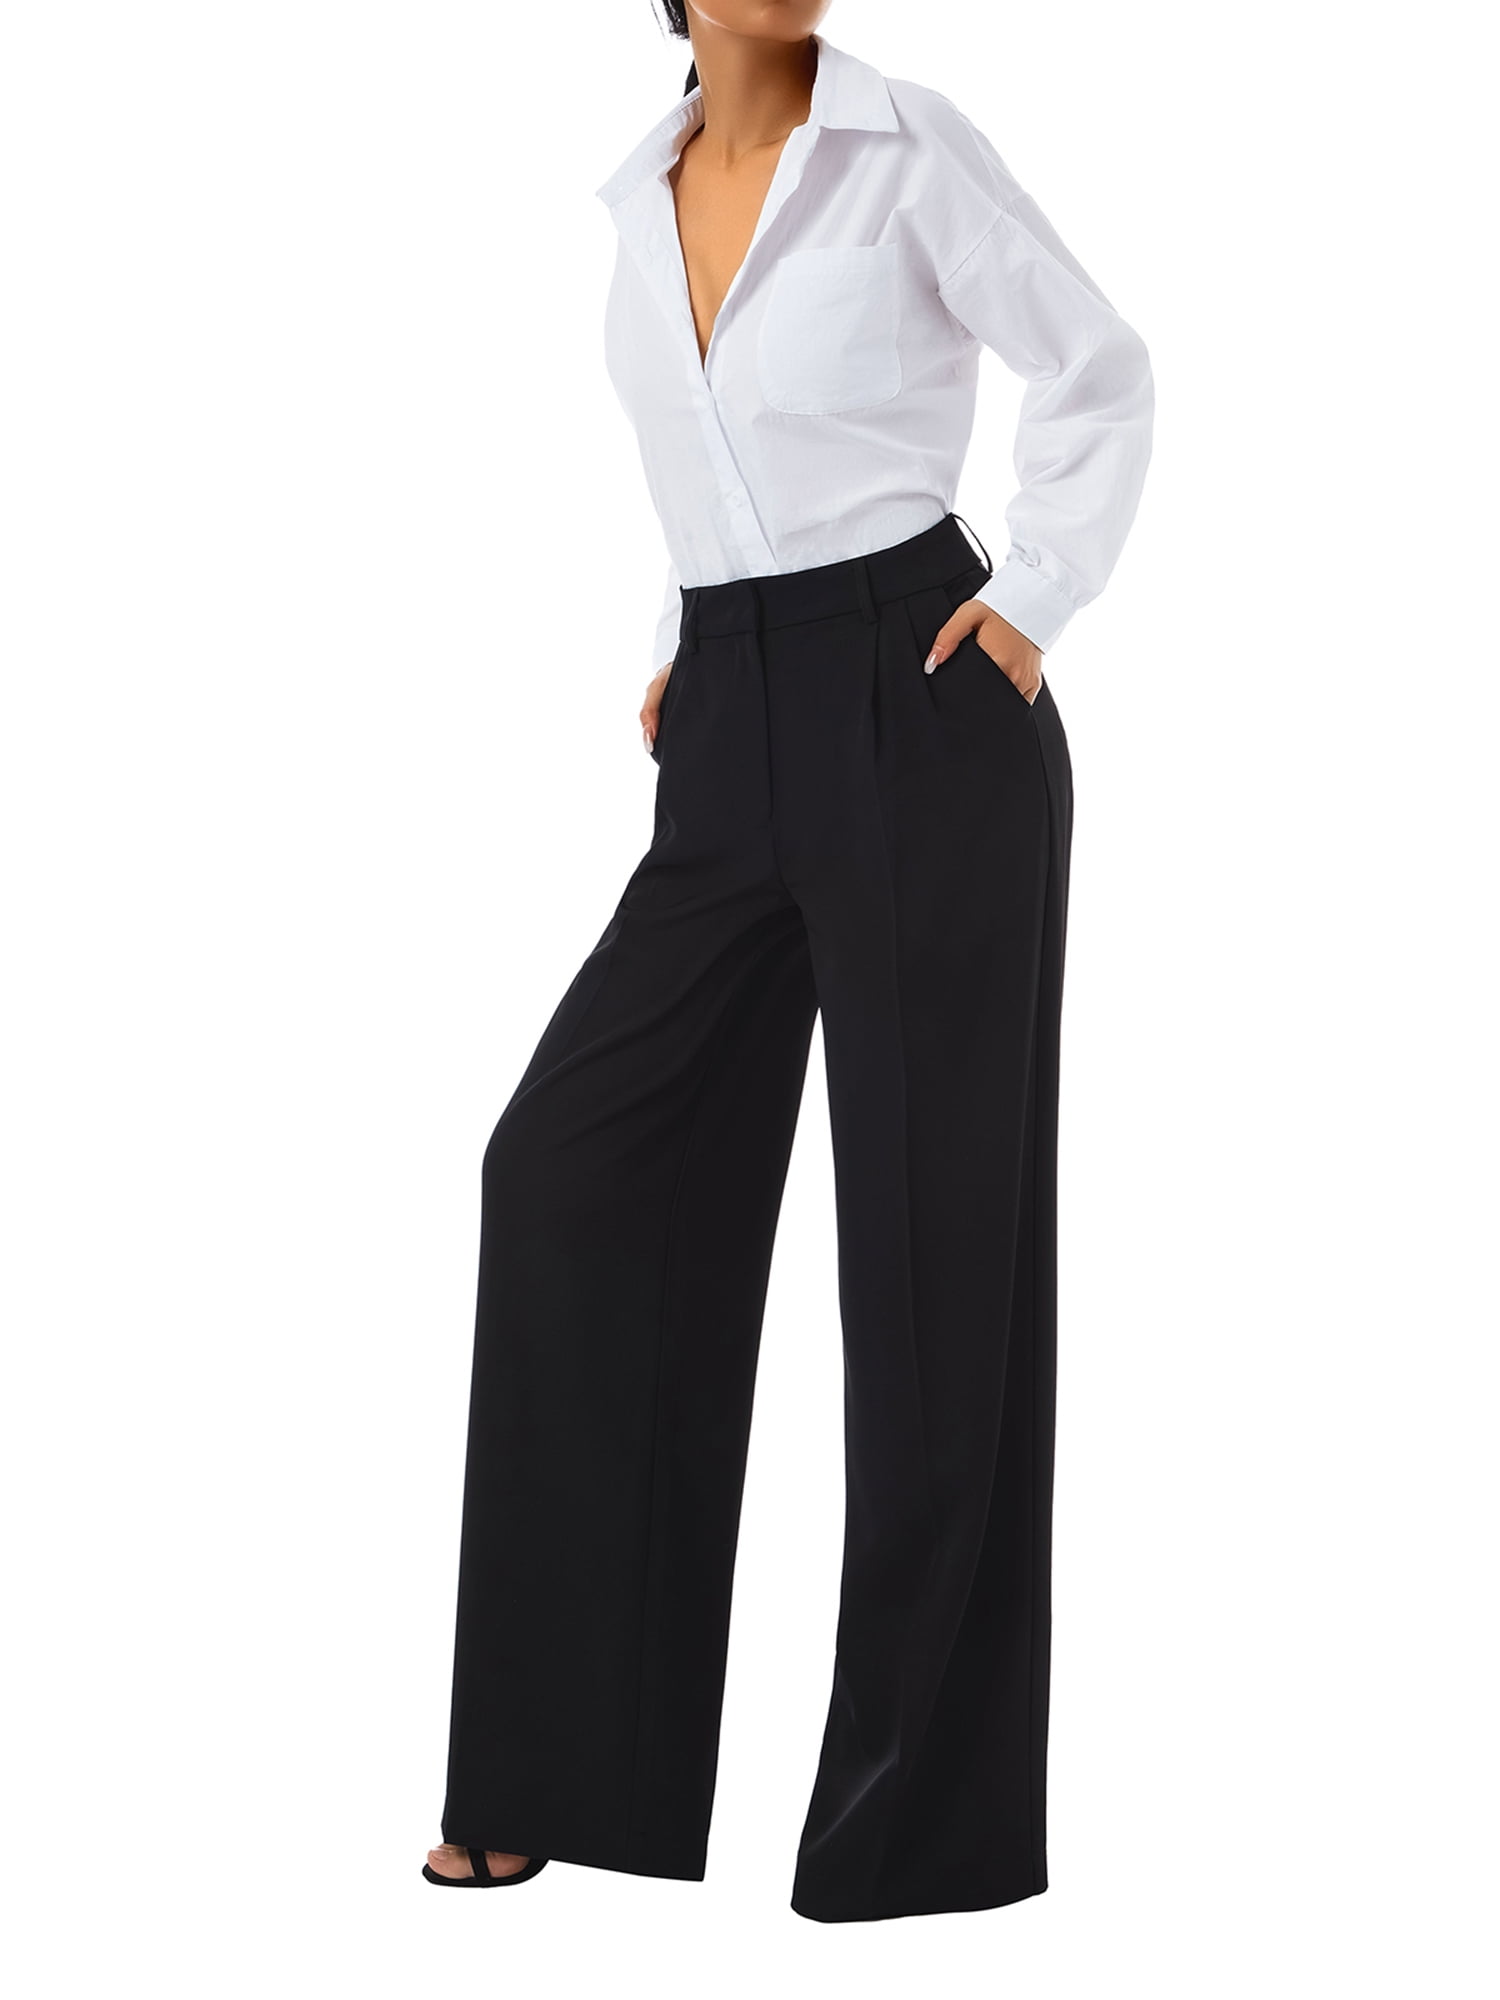 Calsunbaby Office Lady Women Suit Pants Loose Stretch High Waist Wide ...